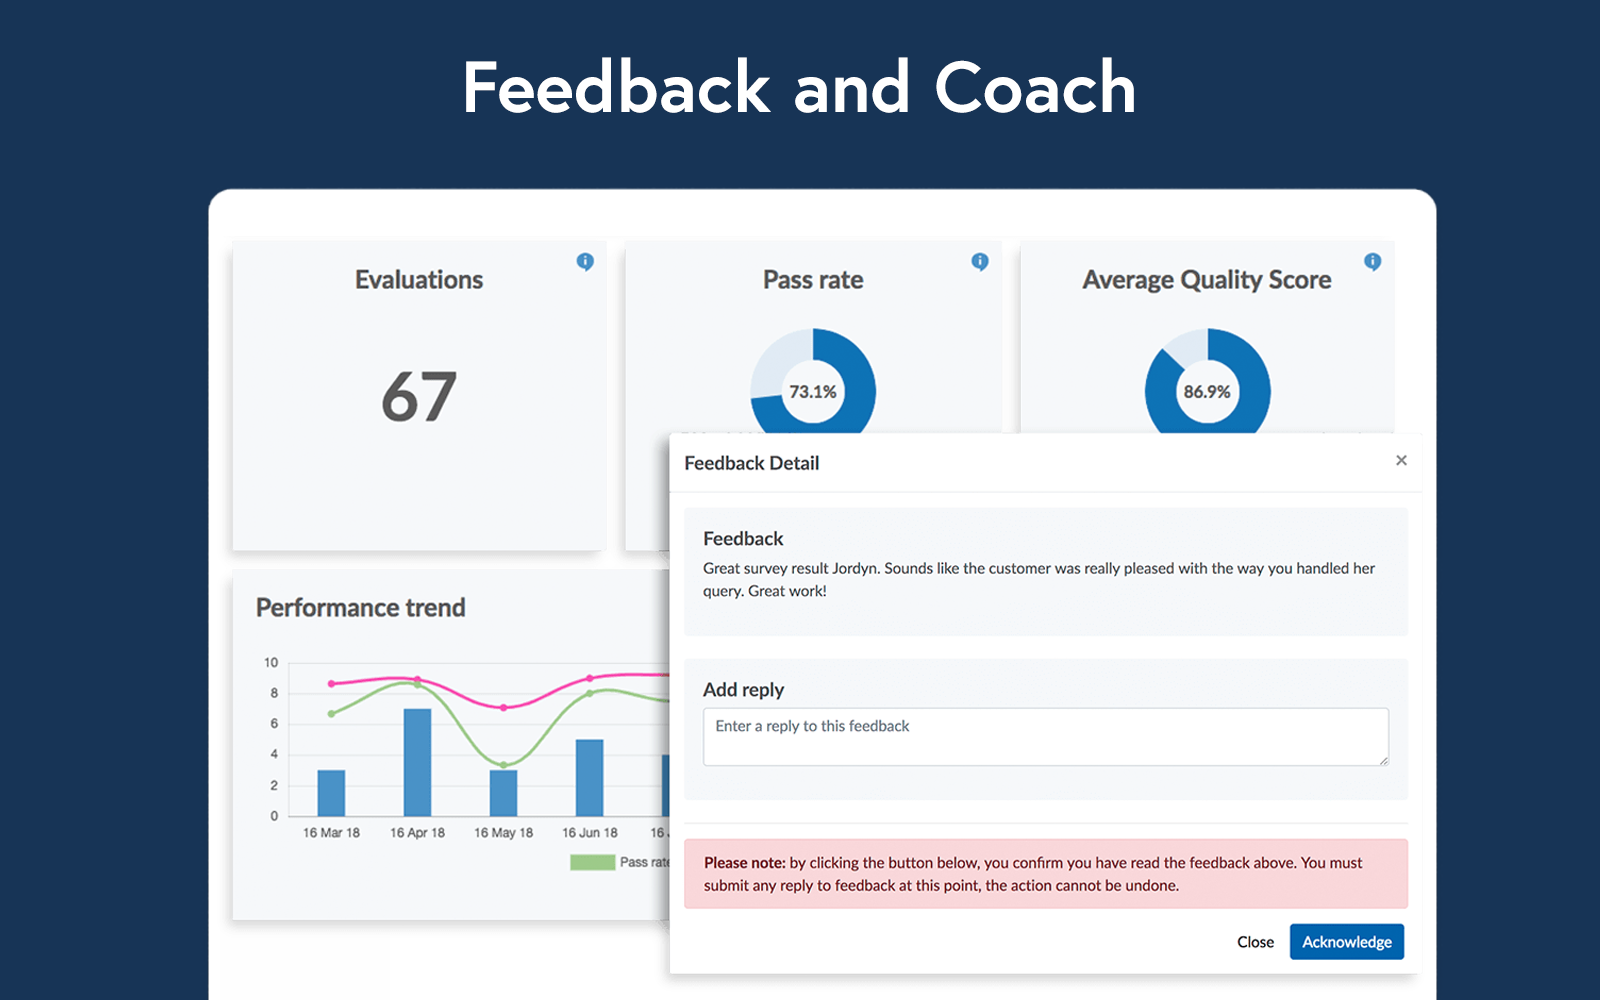 Encourage reps to acknowledge their feedback and quickly share dashboards with senior stakeholders.